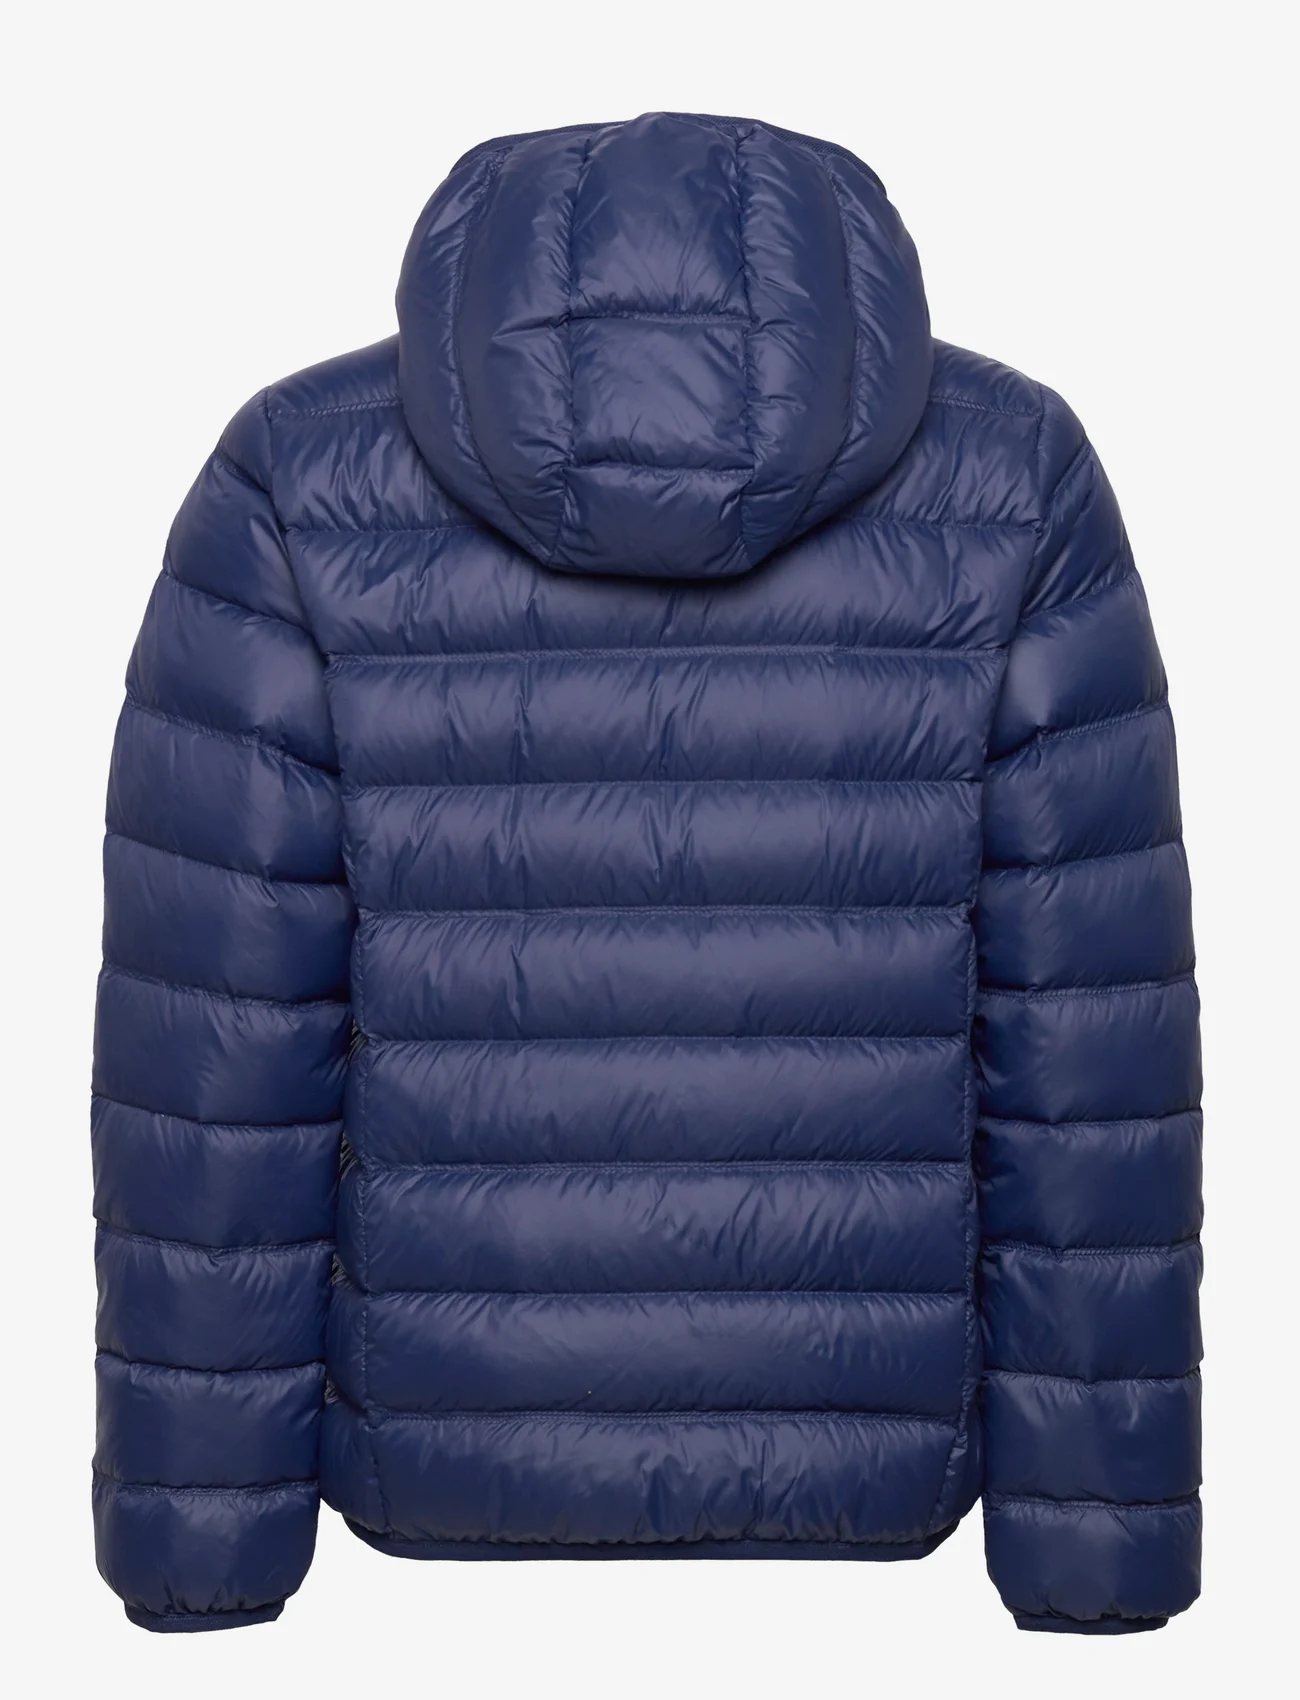 EA7 - OUTERWEAR - insulated jackets - 1554-navy blue - 1